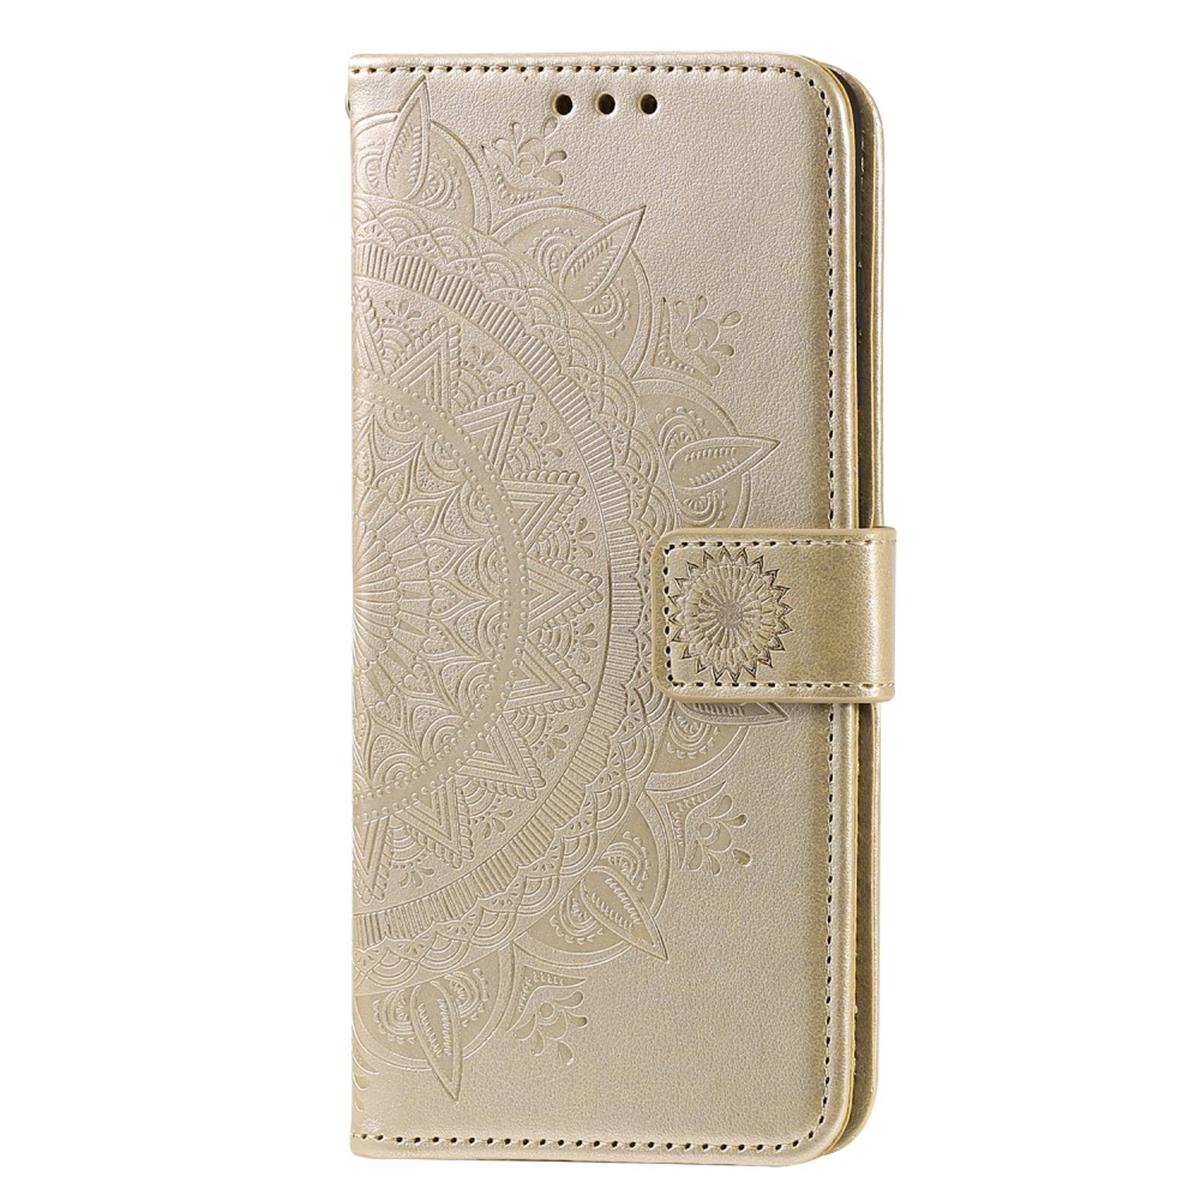 Mandala Klapphülle COVERKINGZ mit Y5p, Gold Bookcover, Huawei, Muster,